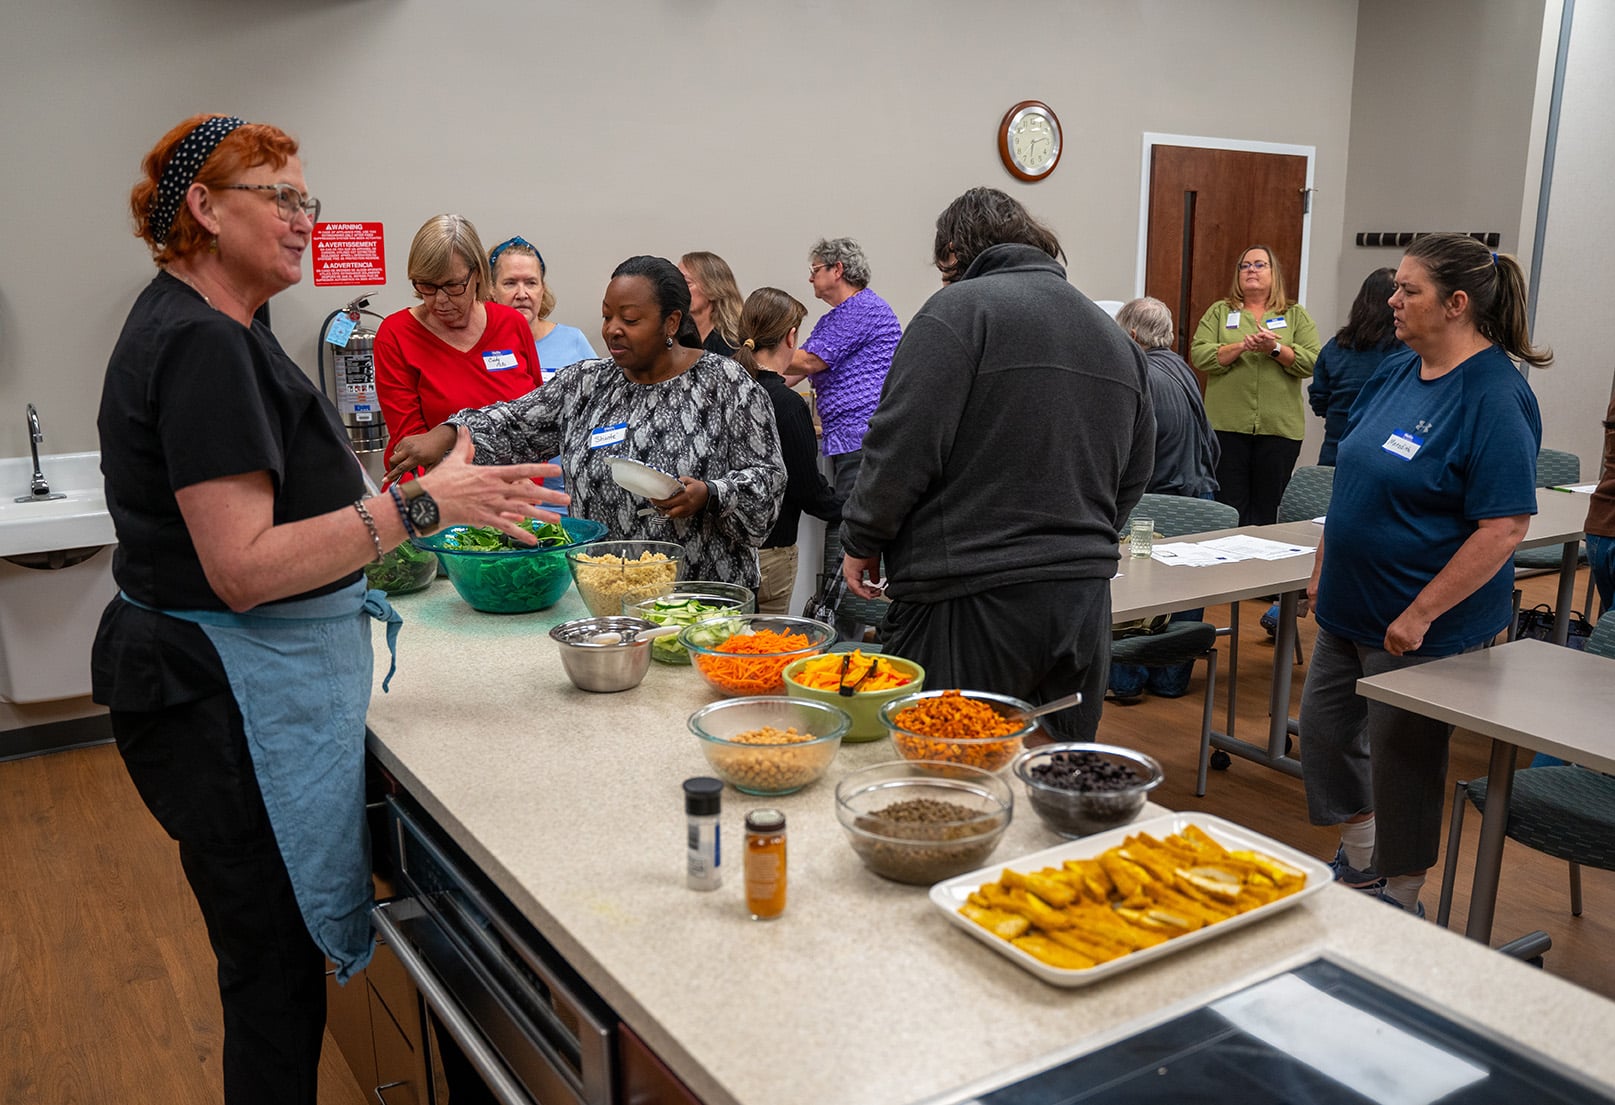 Suzie Houston instructs a Cooking with a Doc class at ECU Health Wellness Center - Greenville. With a healthy meal on the counter, attendees get ready to enjoy a balanced meal.